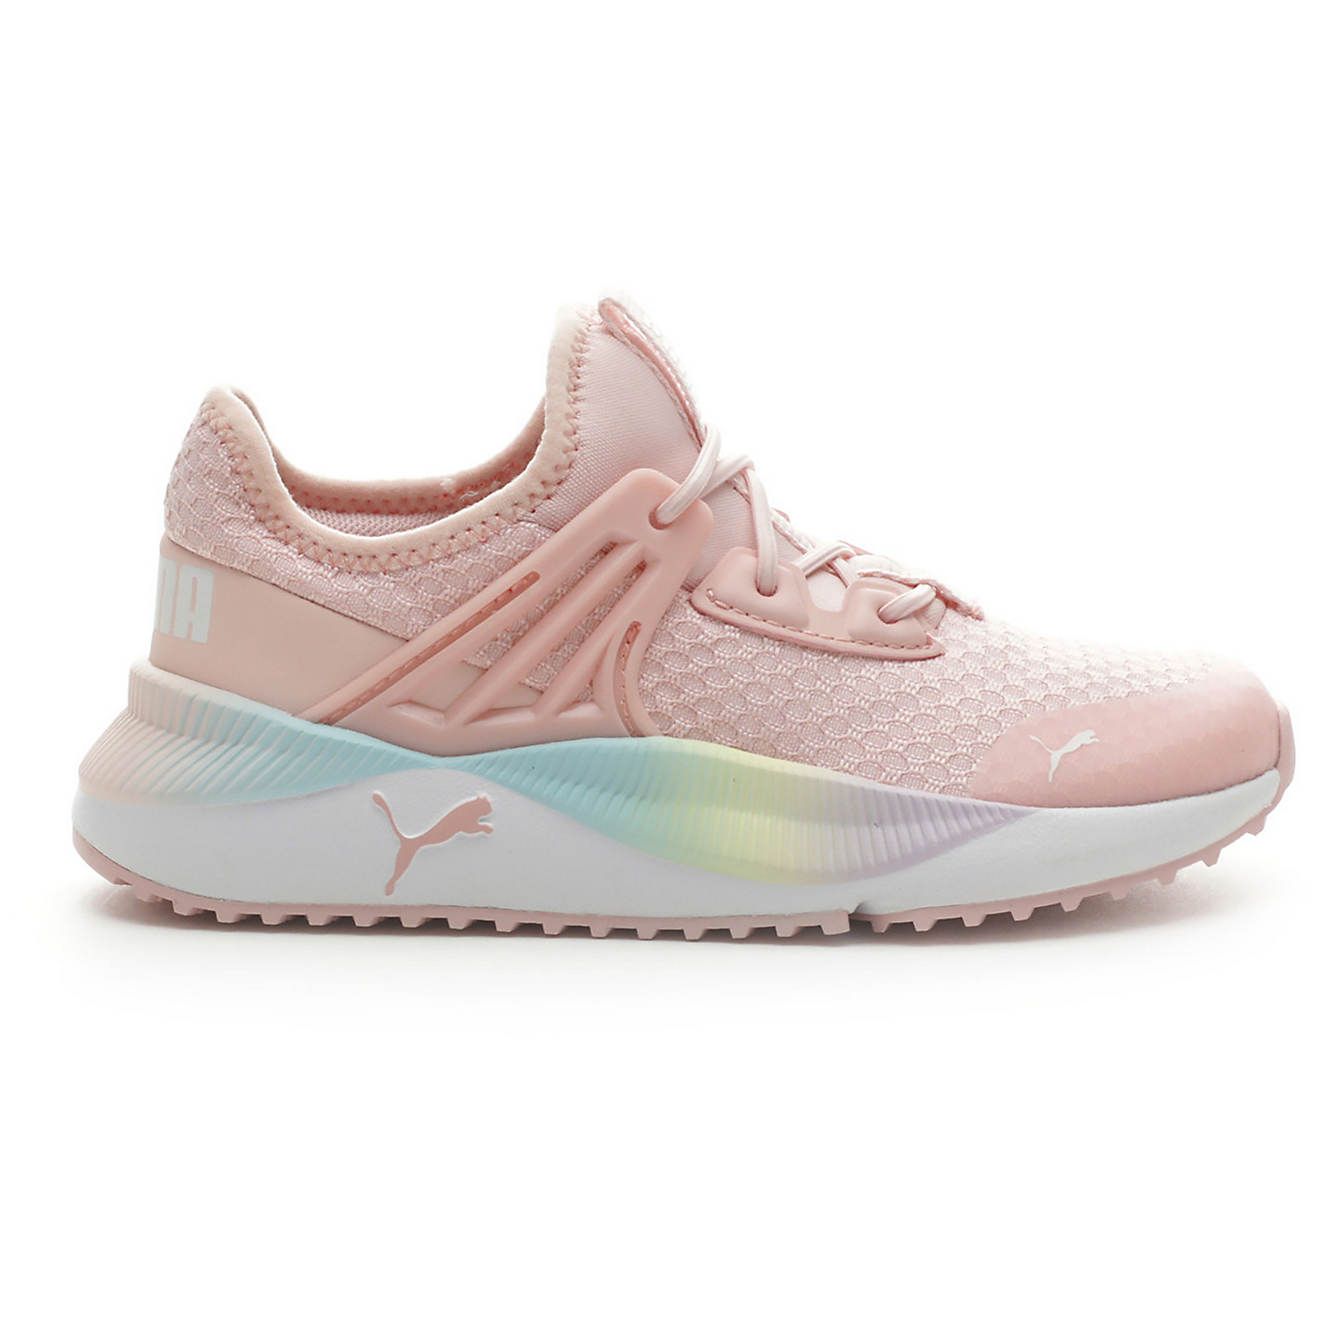 PUMA Girls' Pacer Future Rainbow Running Shoes | Academy | Academy Sports + Outdoors